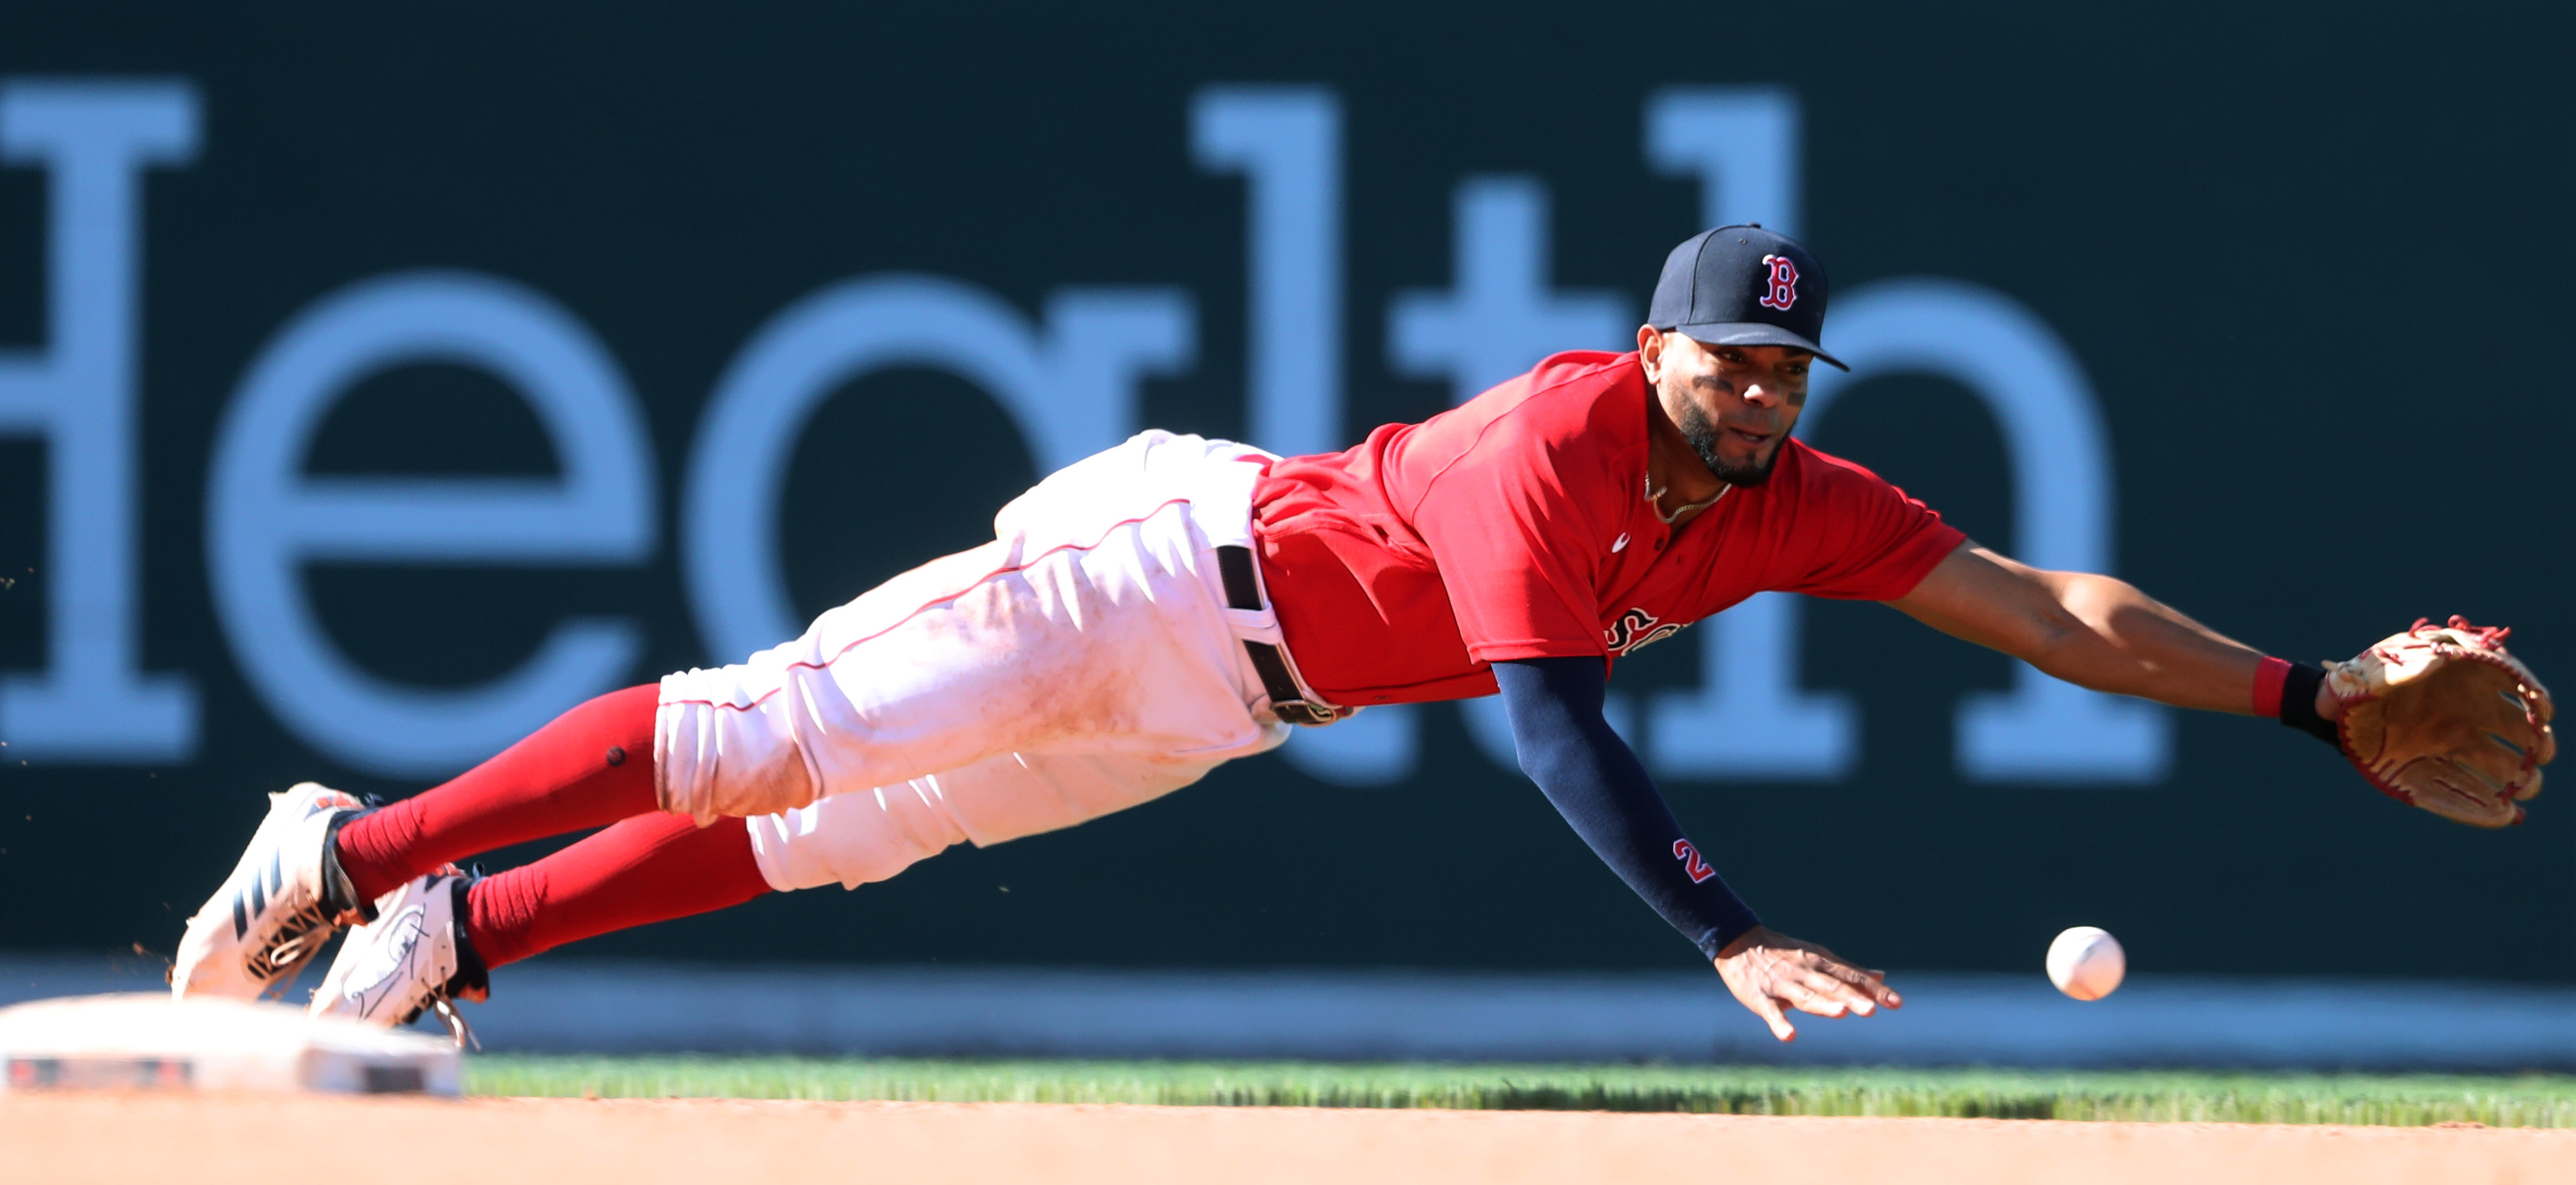 Baseball insiders know Xander Bogaerts is a 'force.' They're just